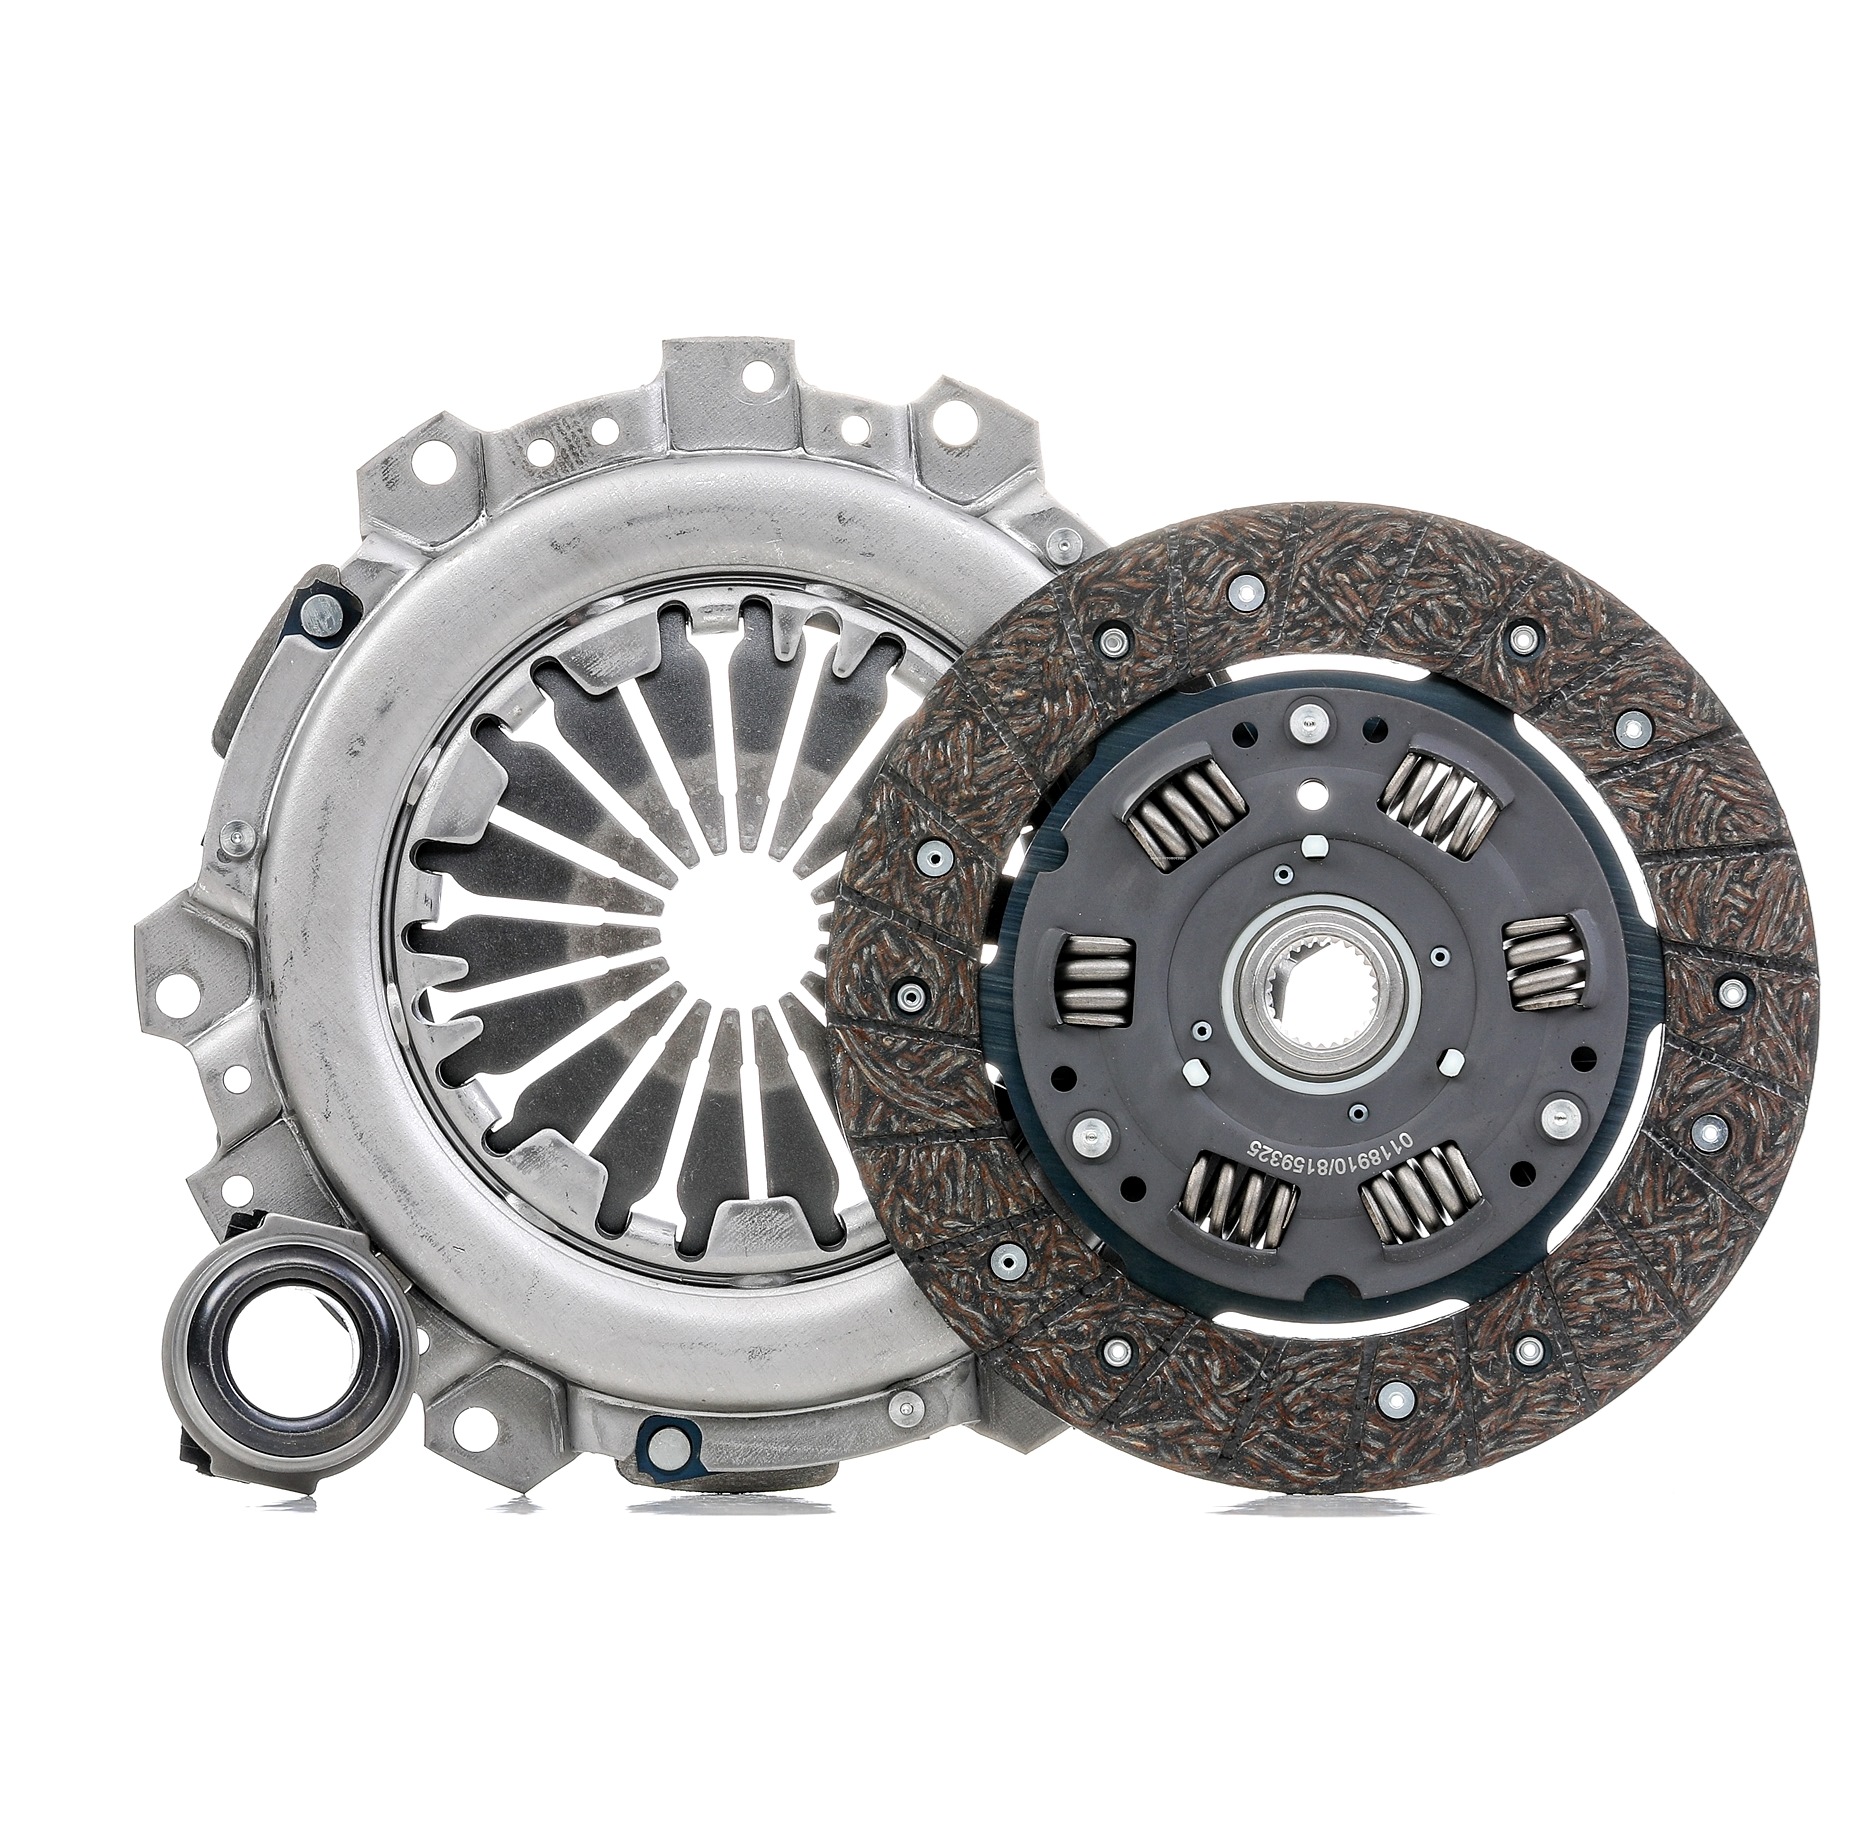 STARK SKCK-0100150 Clutch kit DACIA experience and price